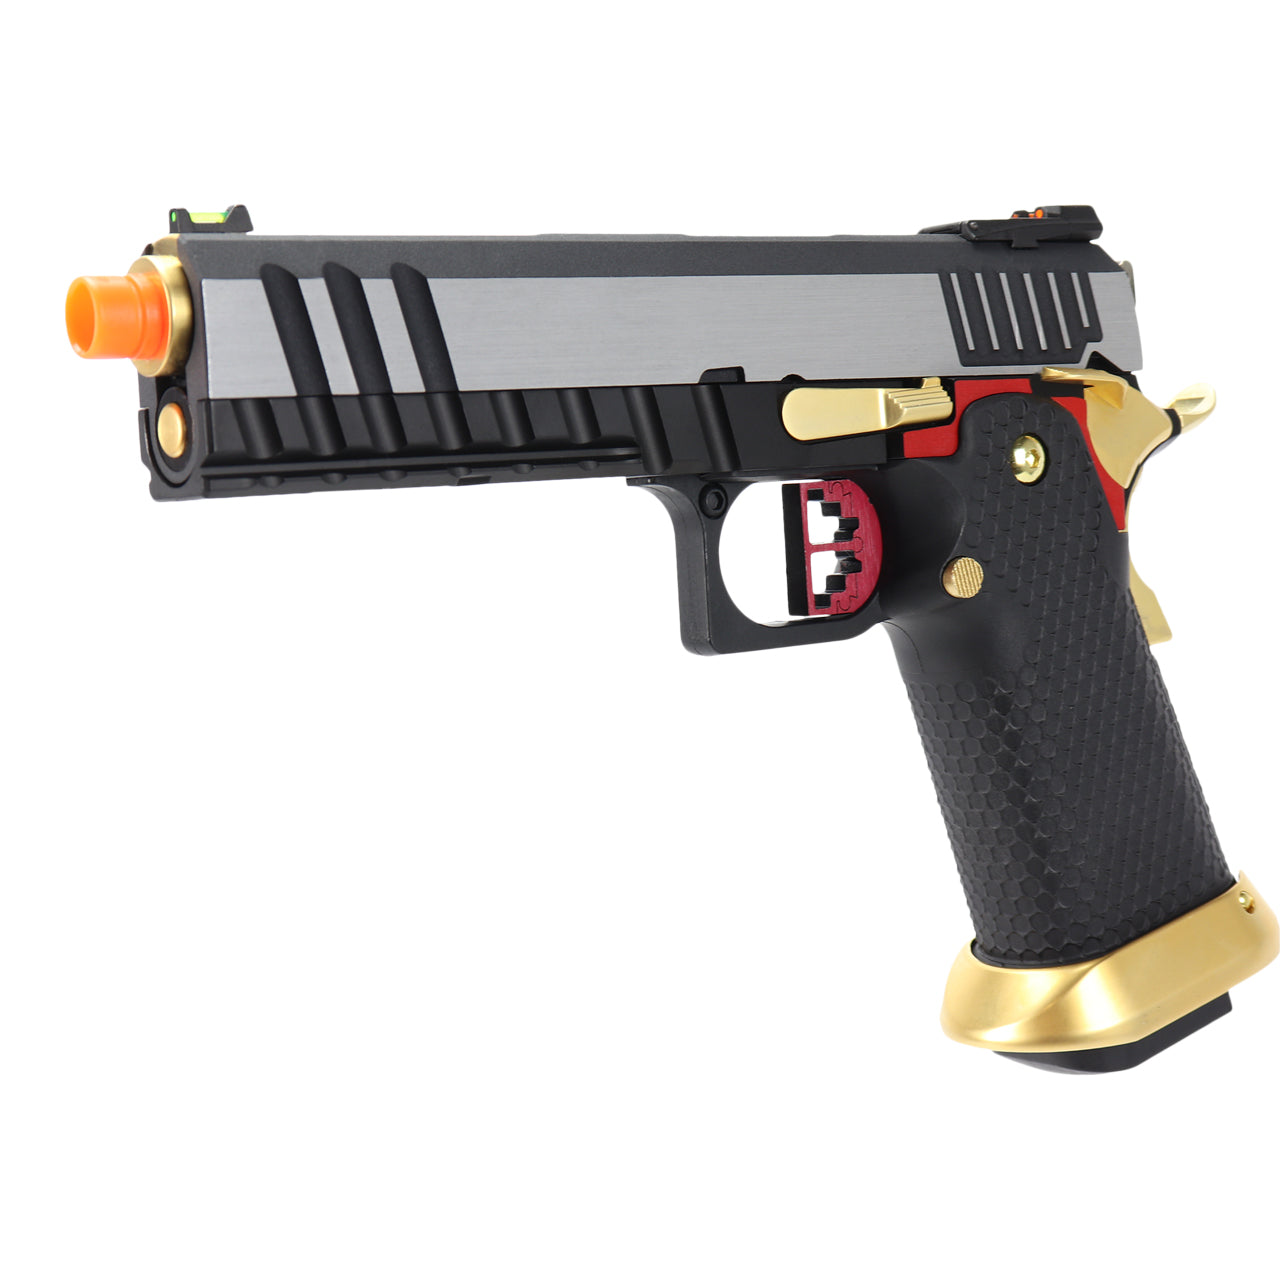 AW Custom "Competitor" Hi-CAPA Gas Blowback Airsoft Pistol Two Tone